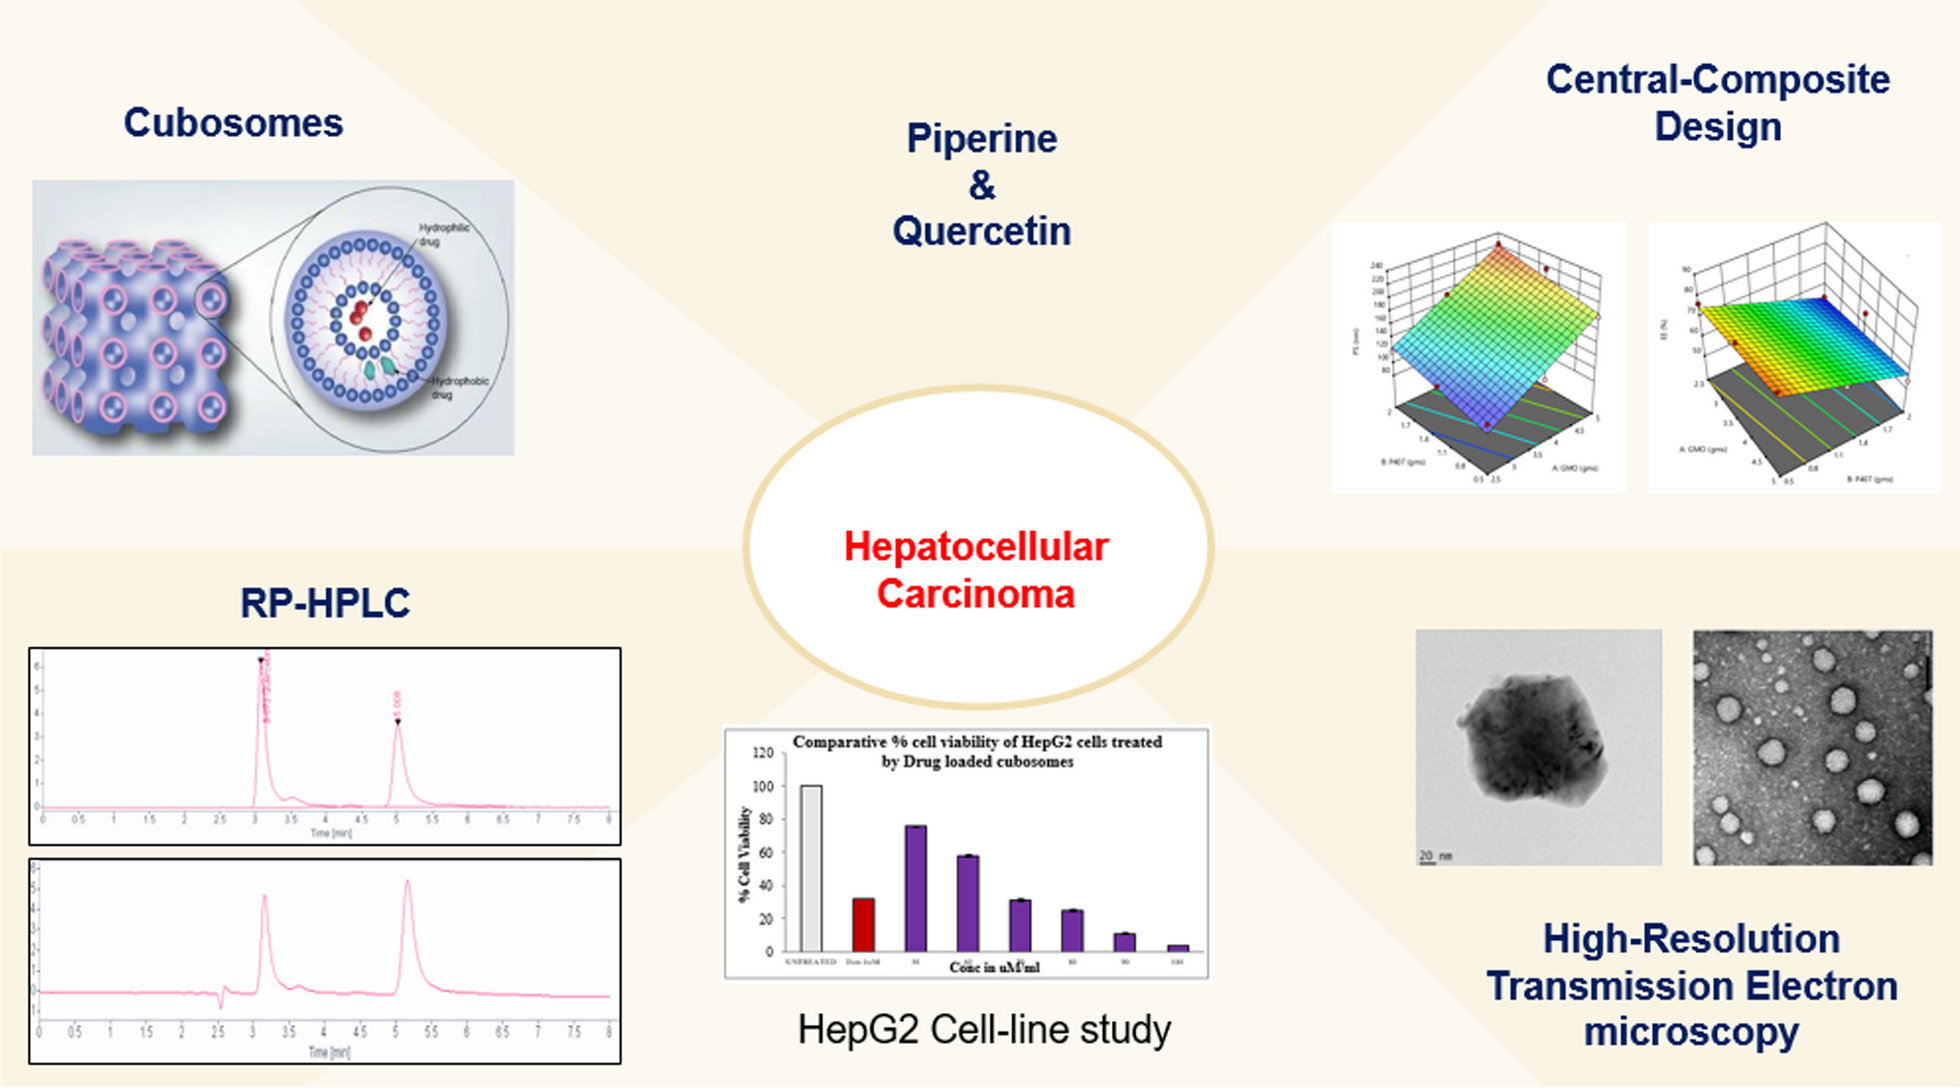 Dual drug-loaded cubosome nanoparticles for hepatocellular carcinoma: a design of experiment approach for optimization and in vitro evaluation